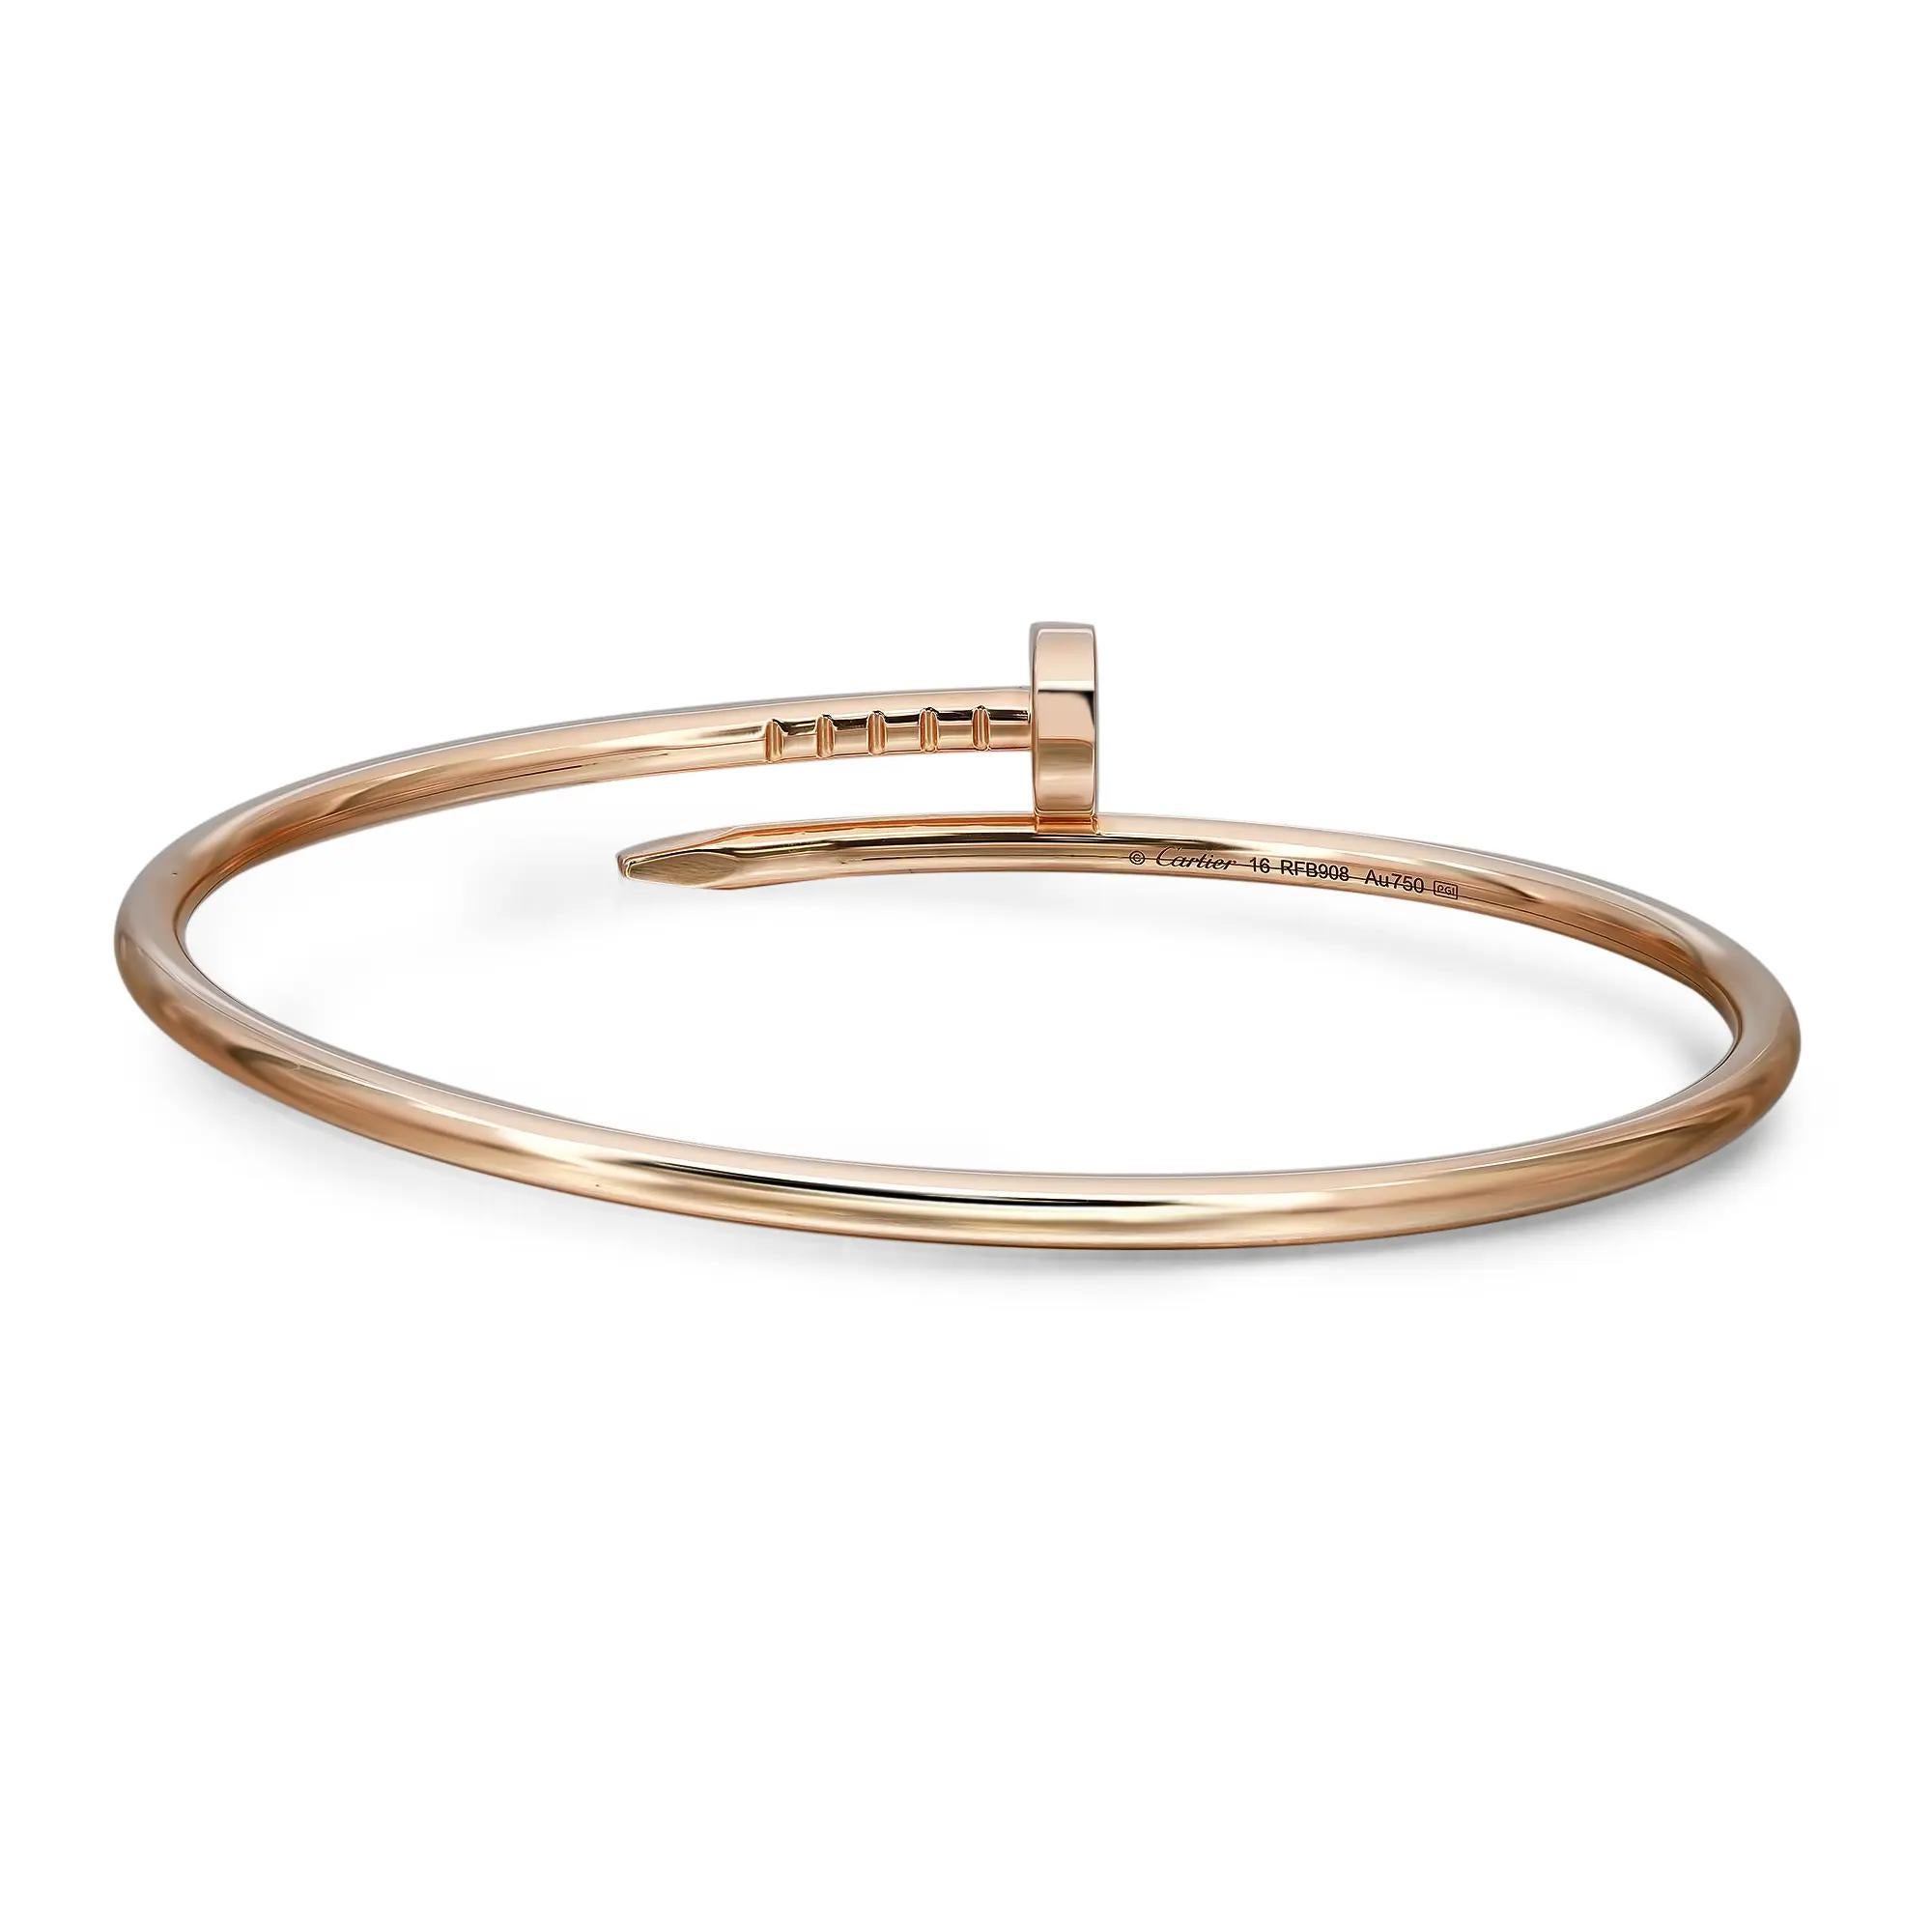 This Cartier Juste Un Clou small model bracelet in size 16. Crafted in 18K Rose Gold, signed Cartier 750. Width: 2.5mm. Cartier continues to be desired and exceptional for its sophistication and elegance with many of its truly iconic designs. This